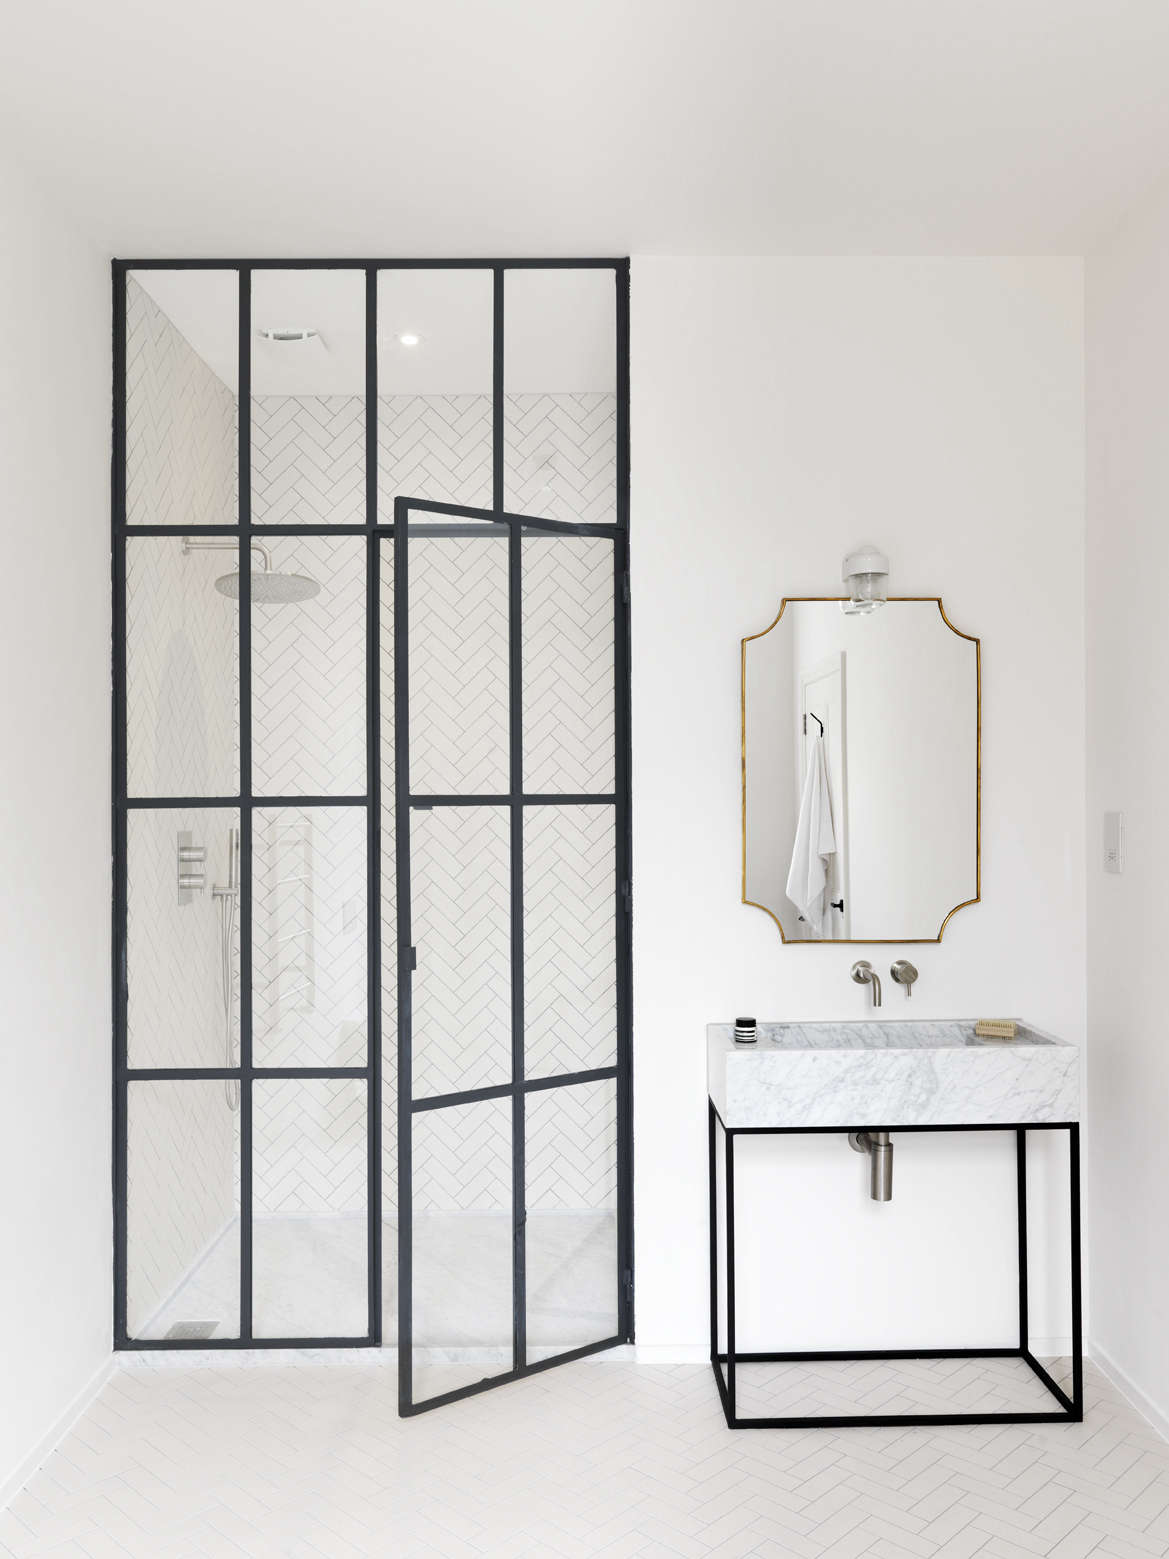 Bathroom of the Week: Steel-Frame Shower Doors in a Fanciful London Project - Remodelista